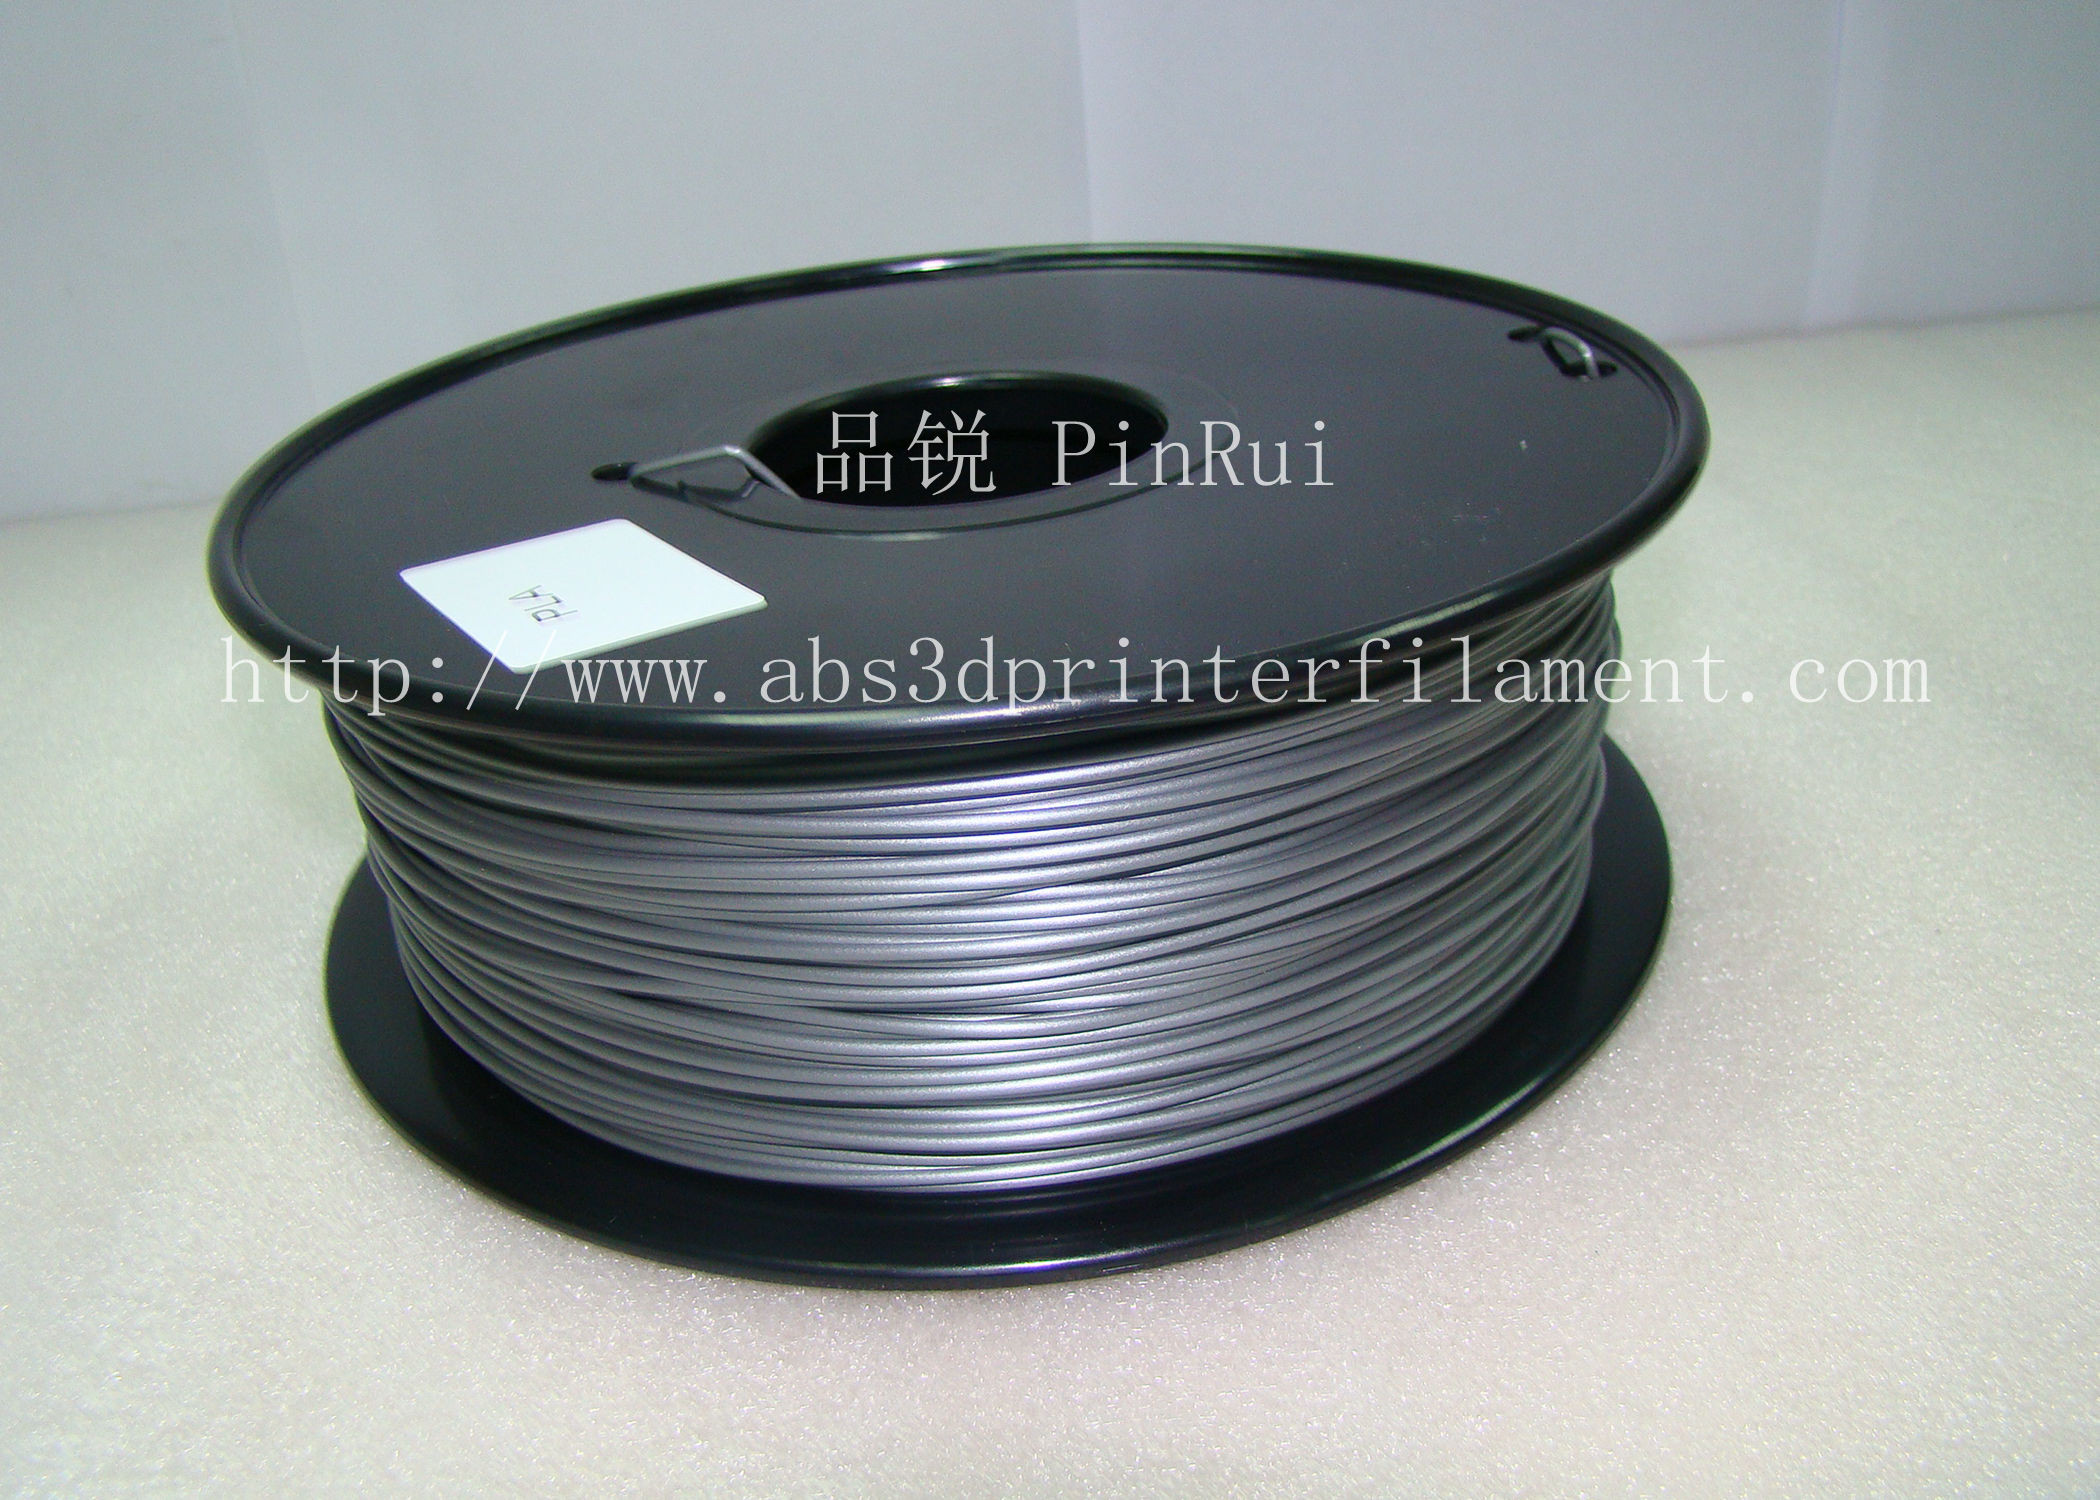 China Colorful PLA 3d Printer Filament 1.75mm and 3.0mm wholesale